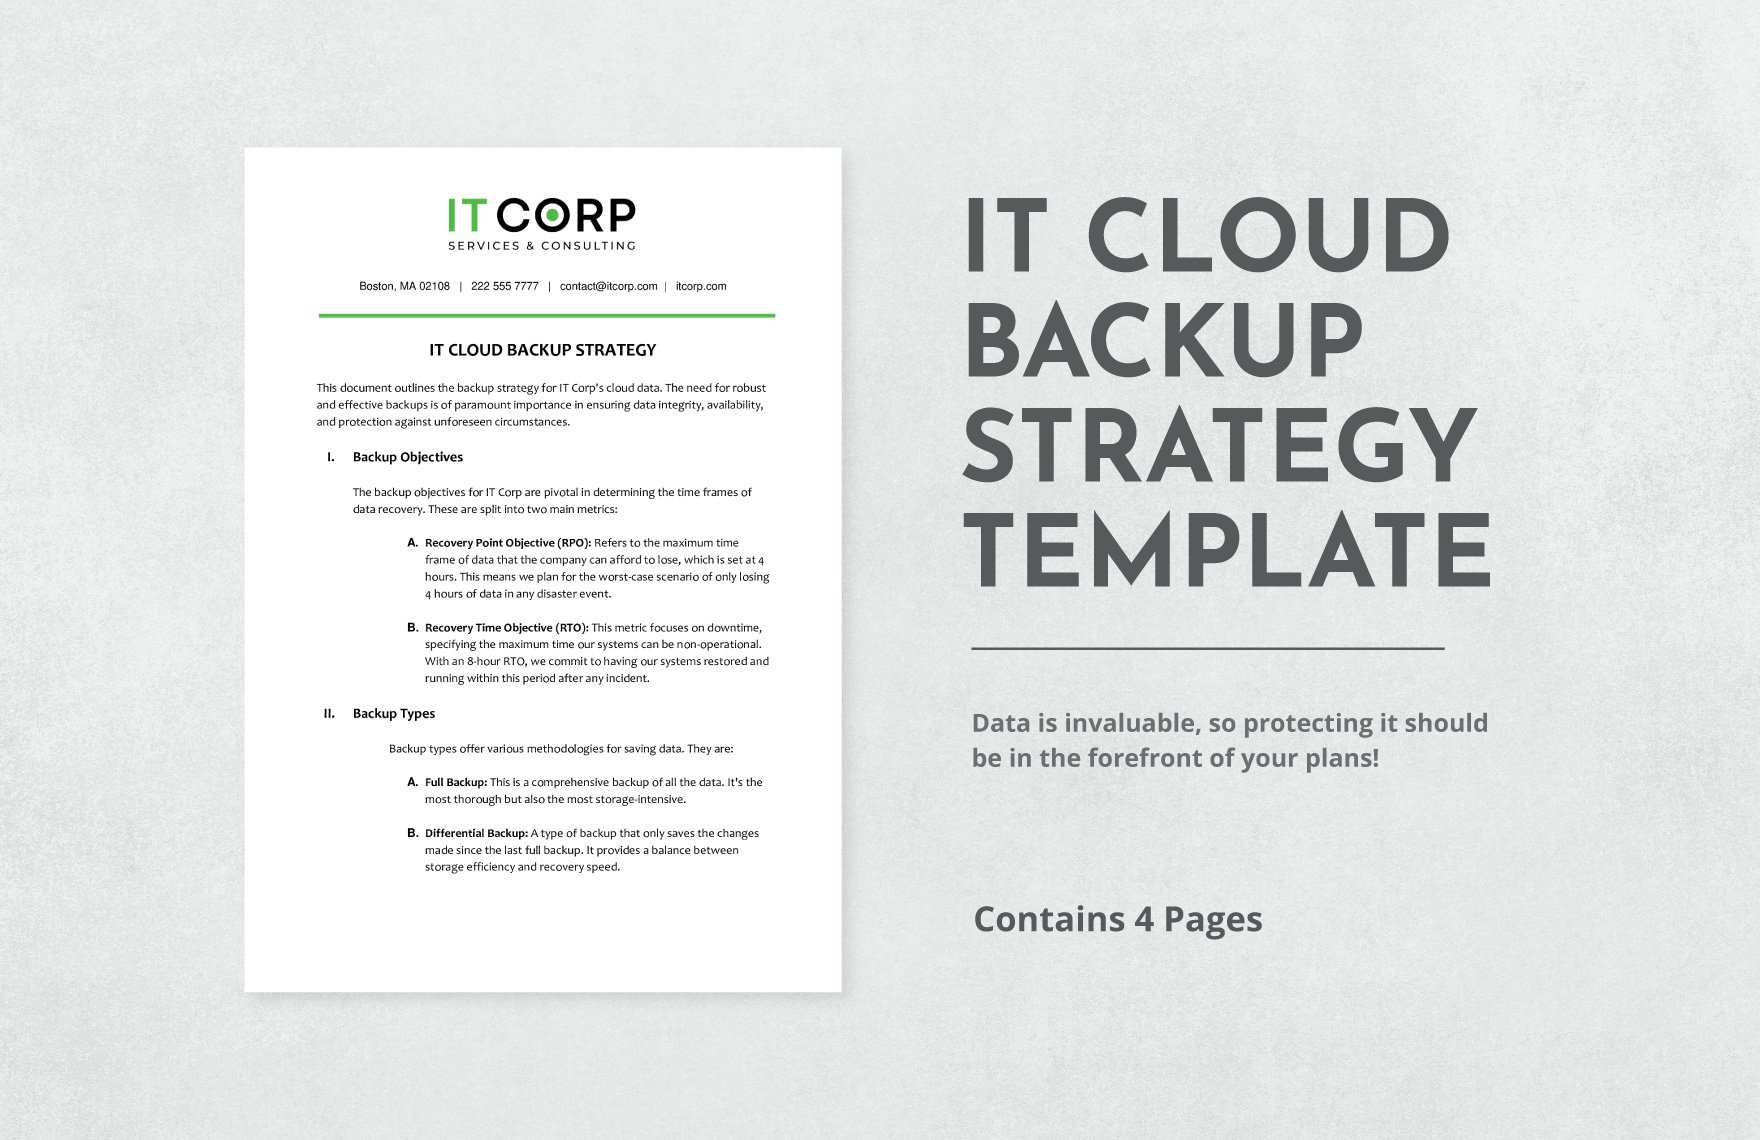 IT Cloud Backup Strategy Template in Word, Google Docs, PDF